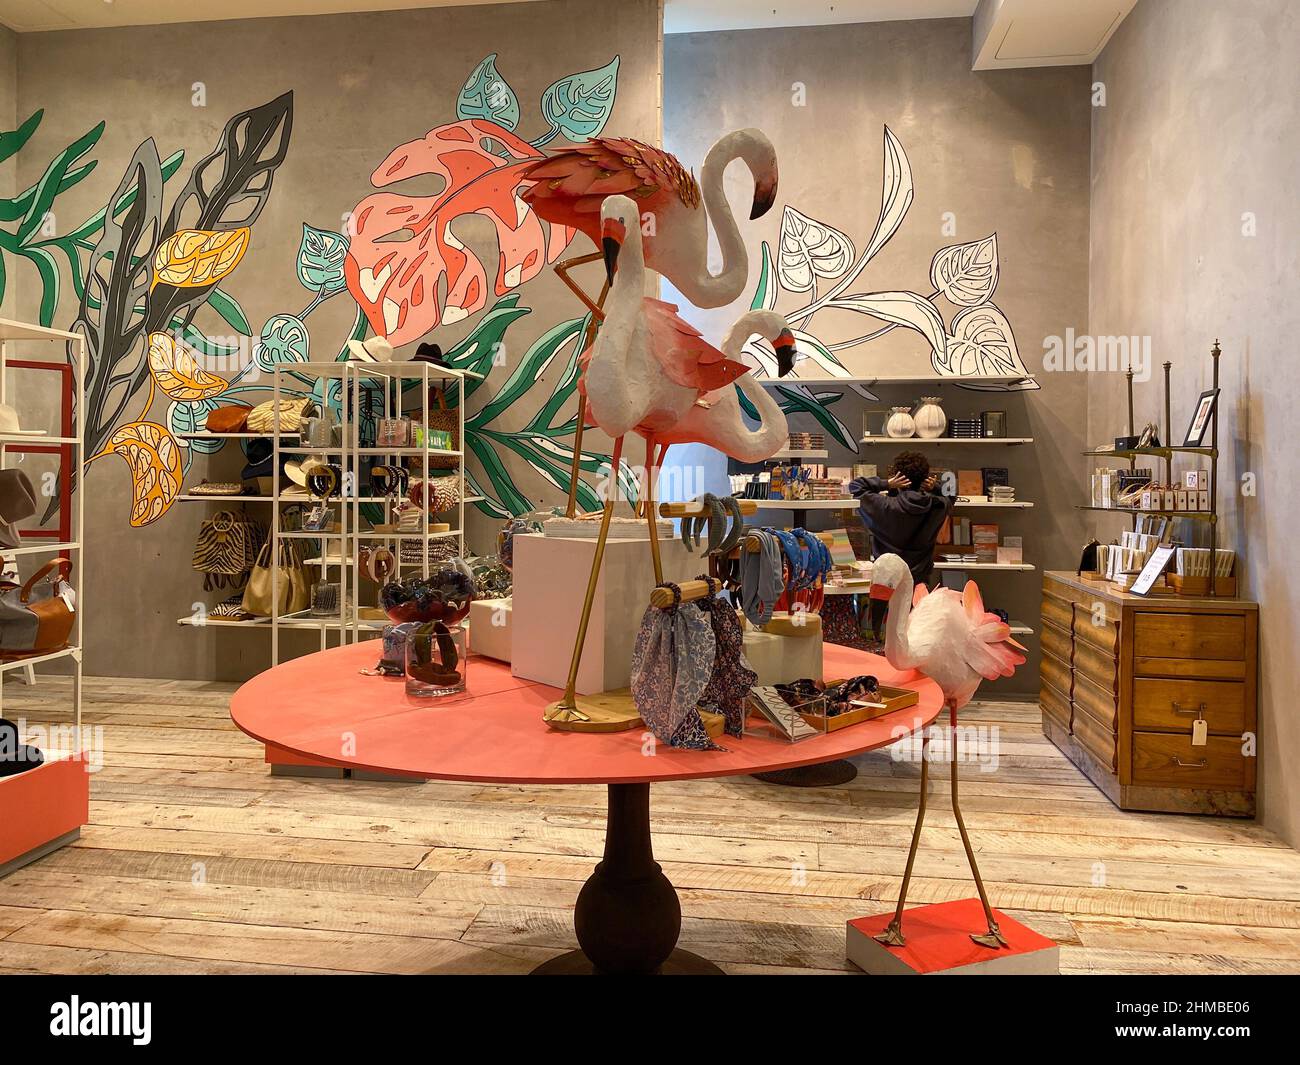 Orlando, FL USA -  February 29, 2020: The interior decor with Pink Flamingos and hair ties for sale at an Anthropologie store at an outdoor mall in Or Stock Photo